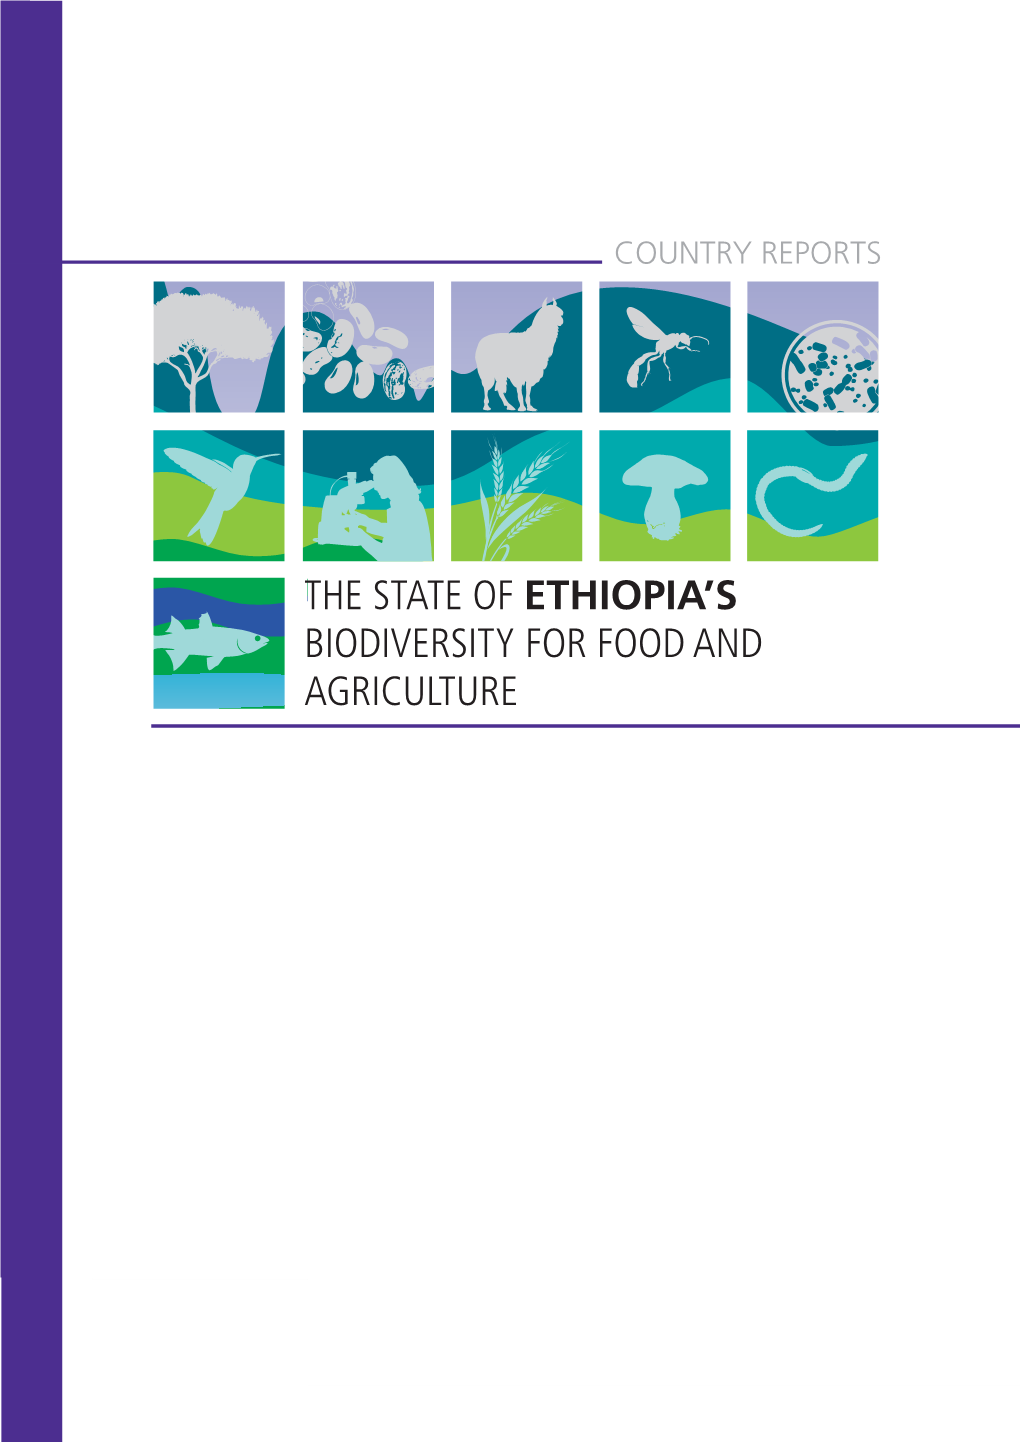 The State of Ethiopia's Biodiversity for Food And